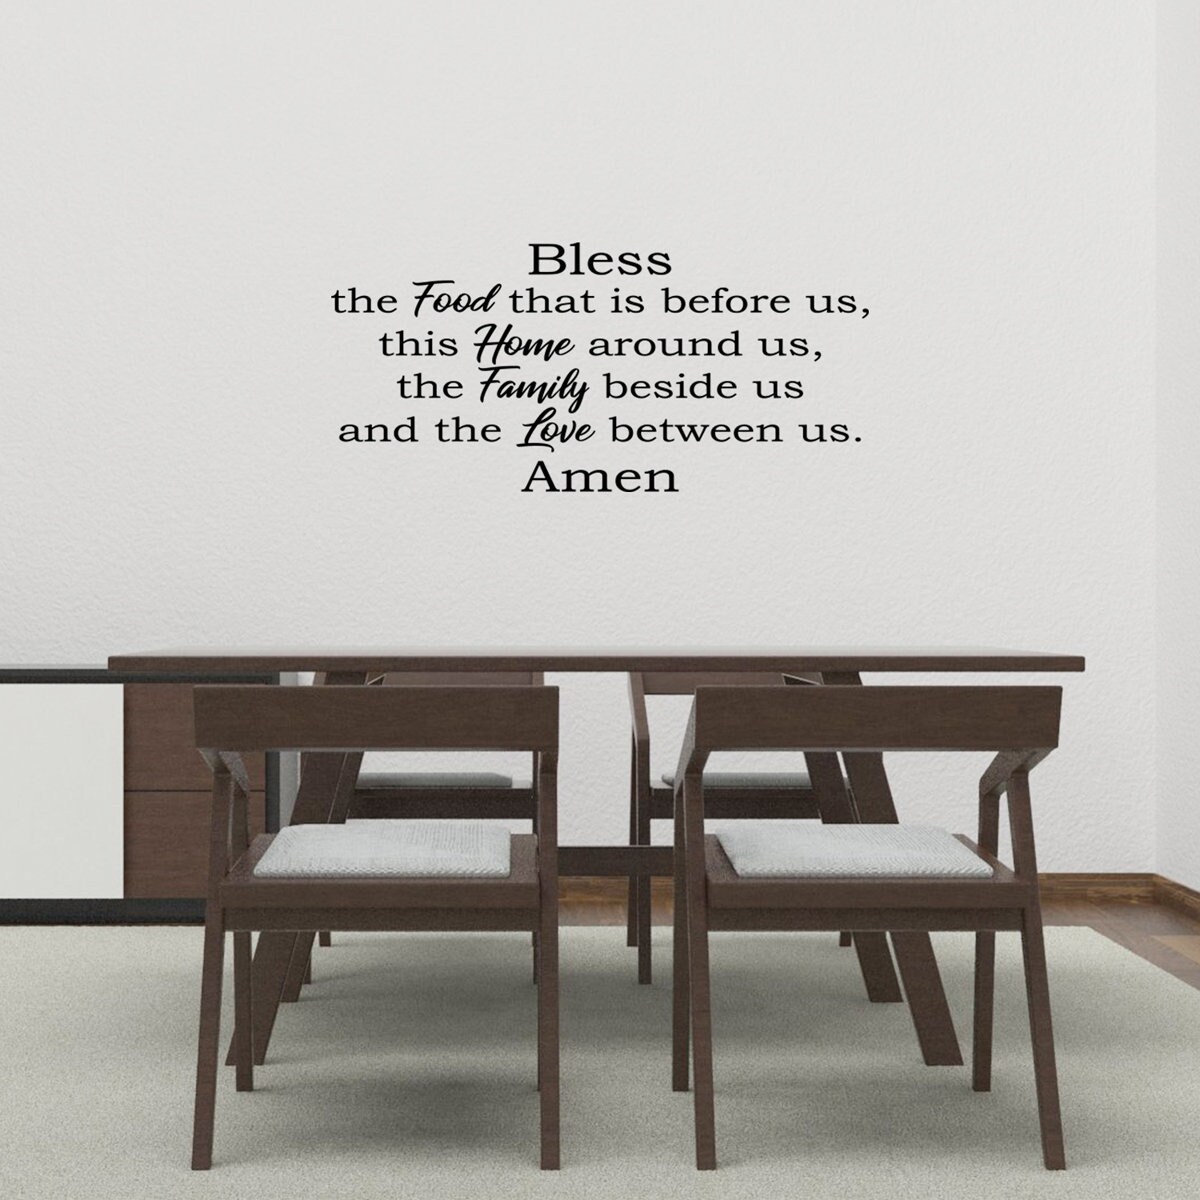 Vinyl Wall Decal Bless the Food Prayer Dining Room Kitchen Stickers Mural ig4687